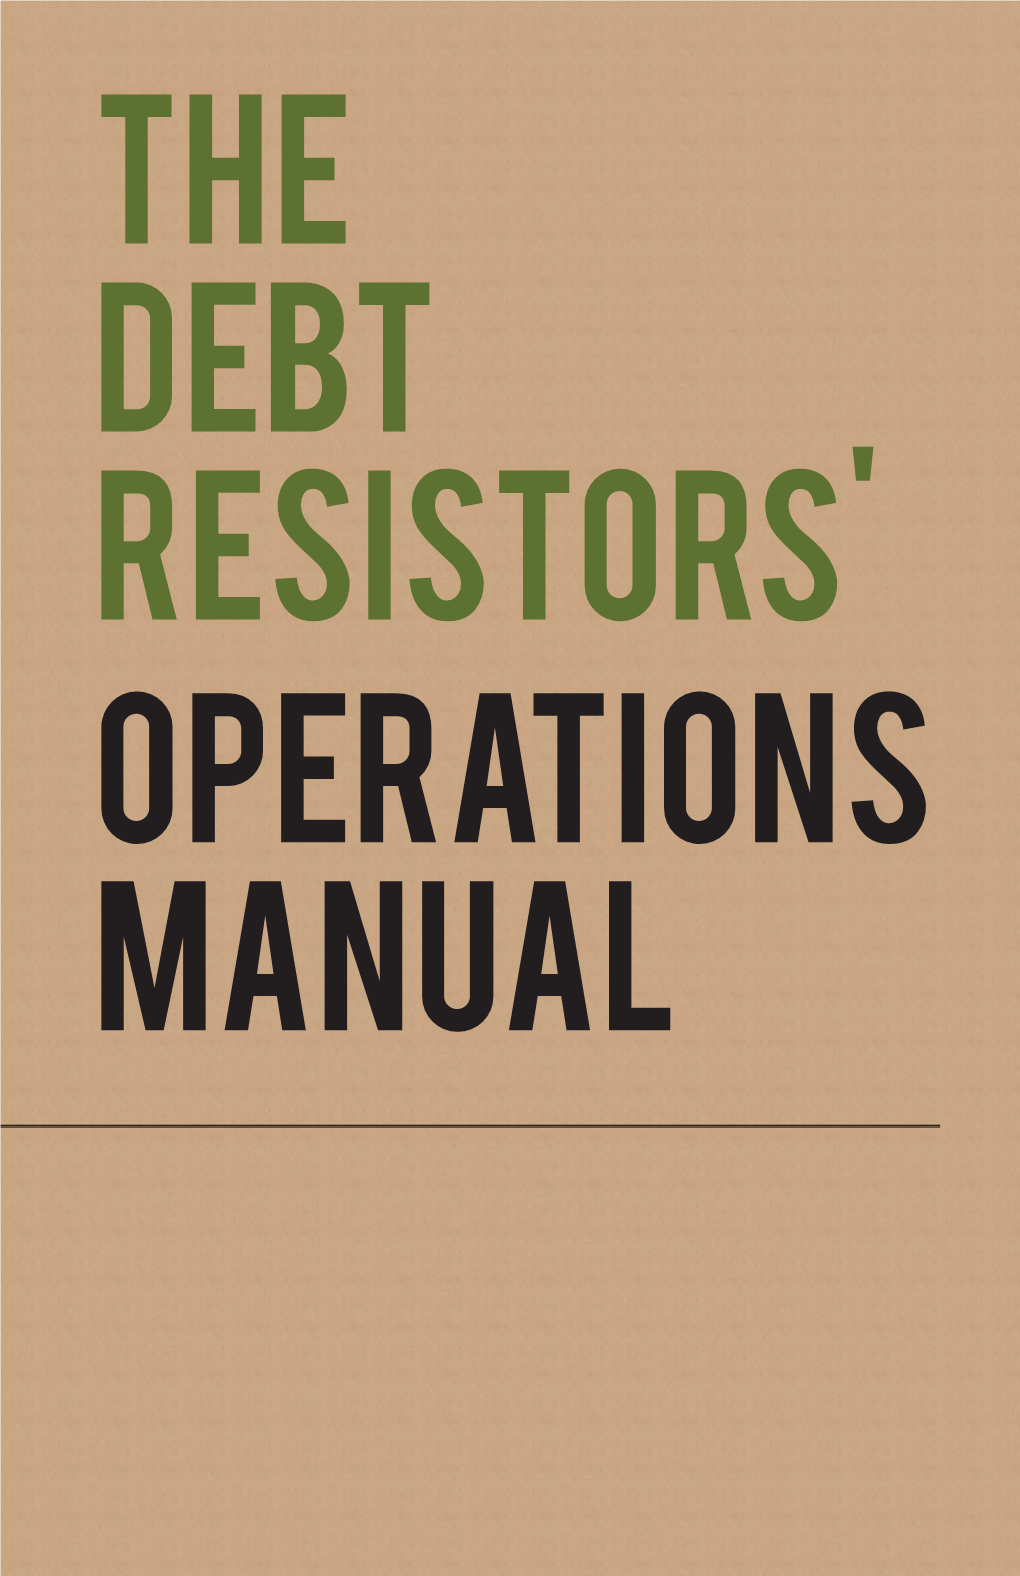 The Debt Resistors' Operations Manual Join the Resistance!